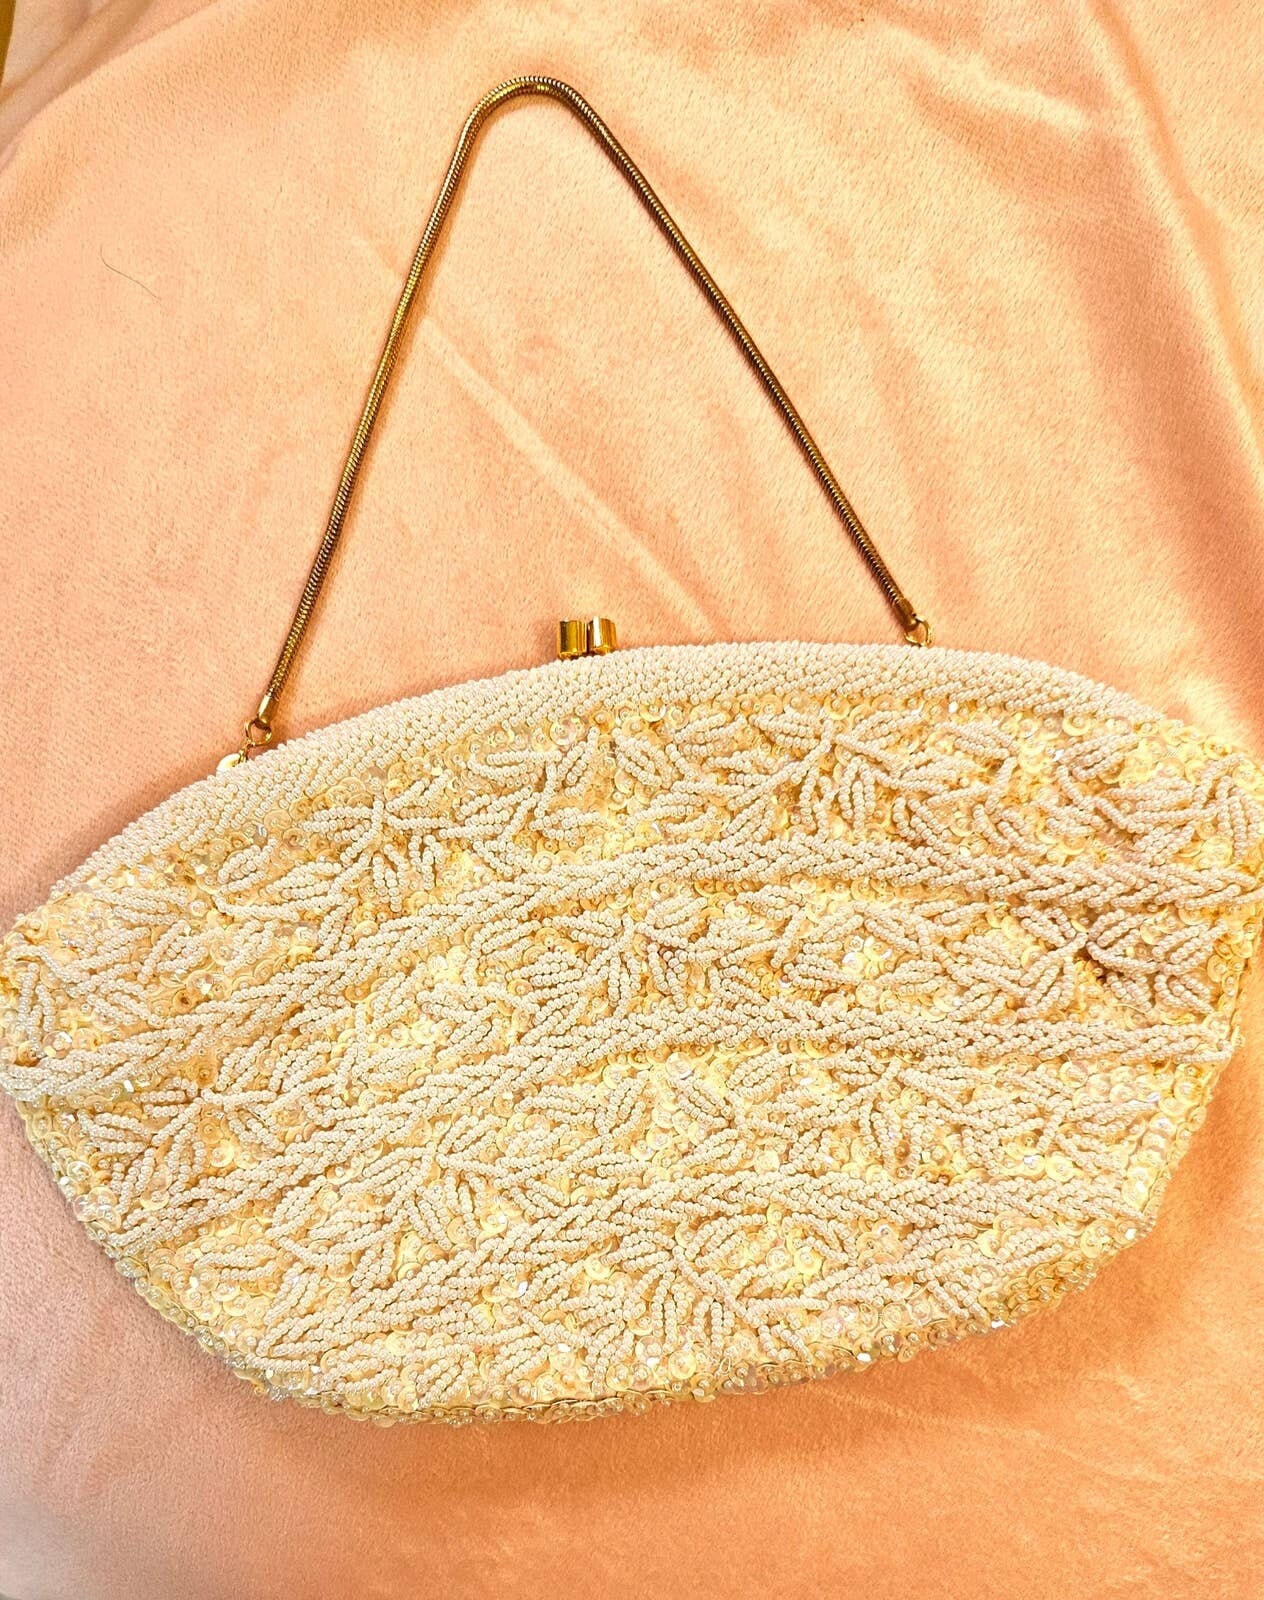 La Regale Ltd. Evening Bag, Hand Beaded, White Pearlescent with Rope Chain